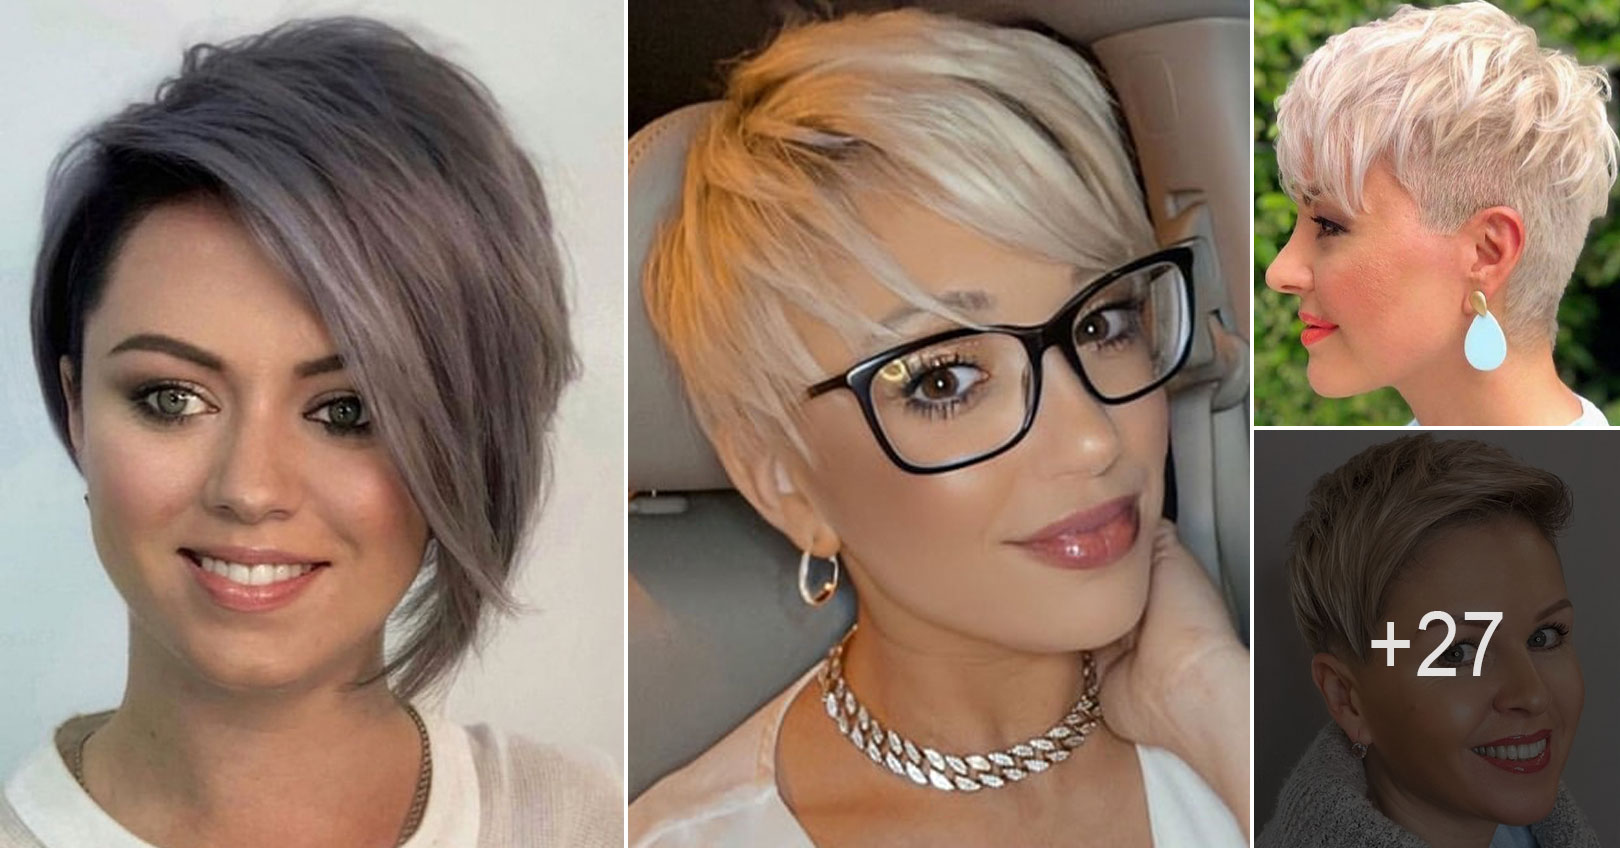 6. 40+ Chic Short Haircuts: Popular Short Hairstyles for 2021 - wide 8